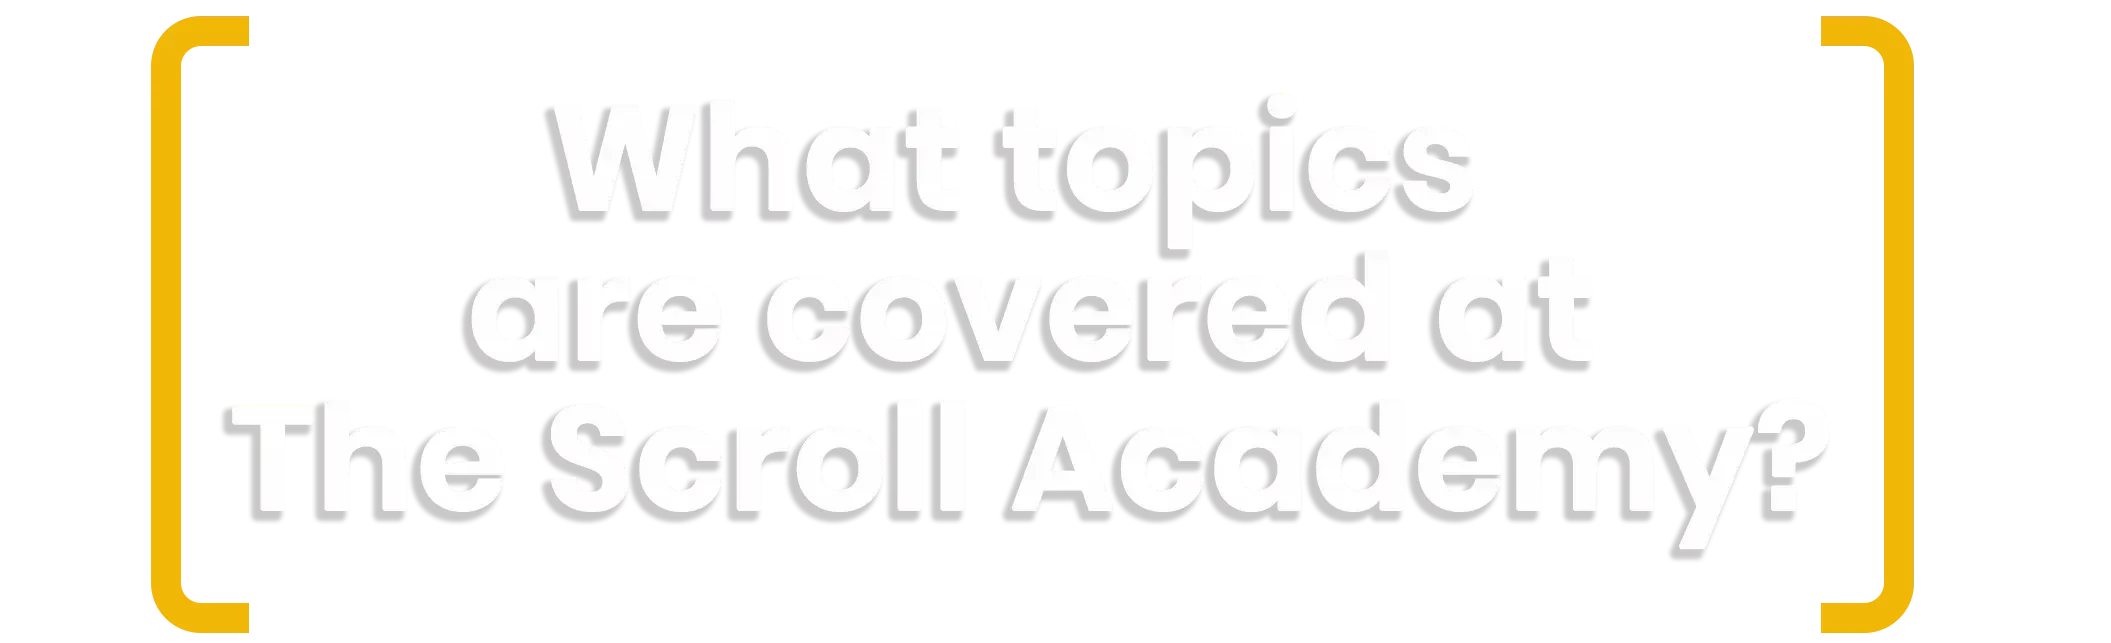 Banner with text asking what topics are covered at The Scroll Academy